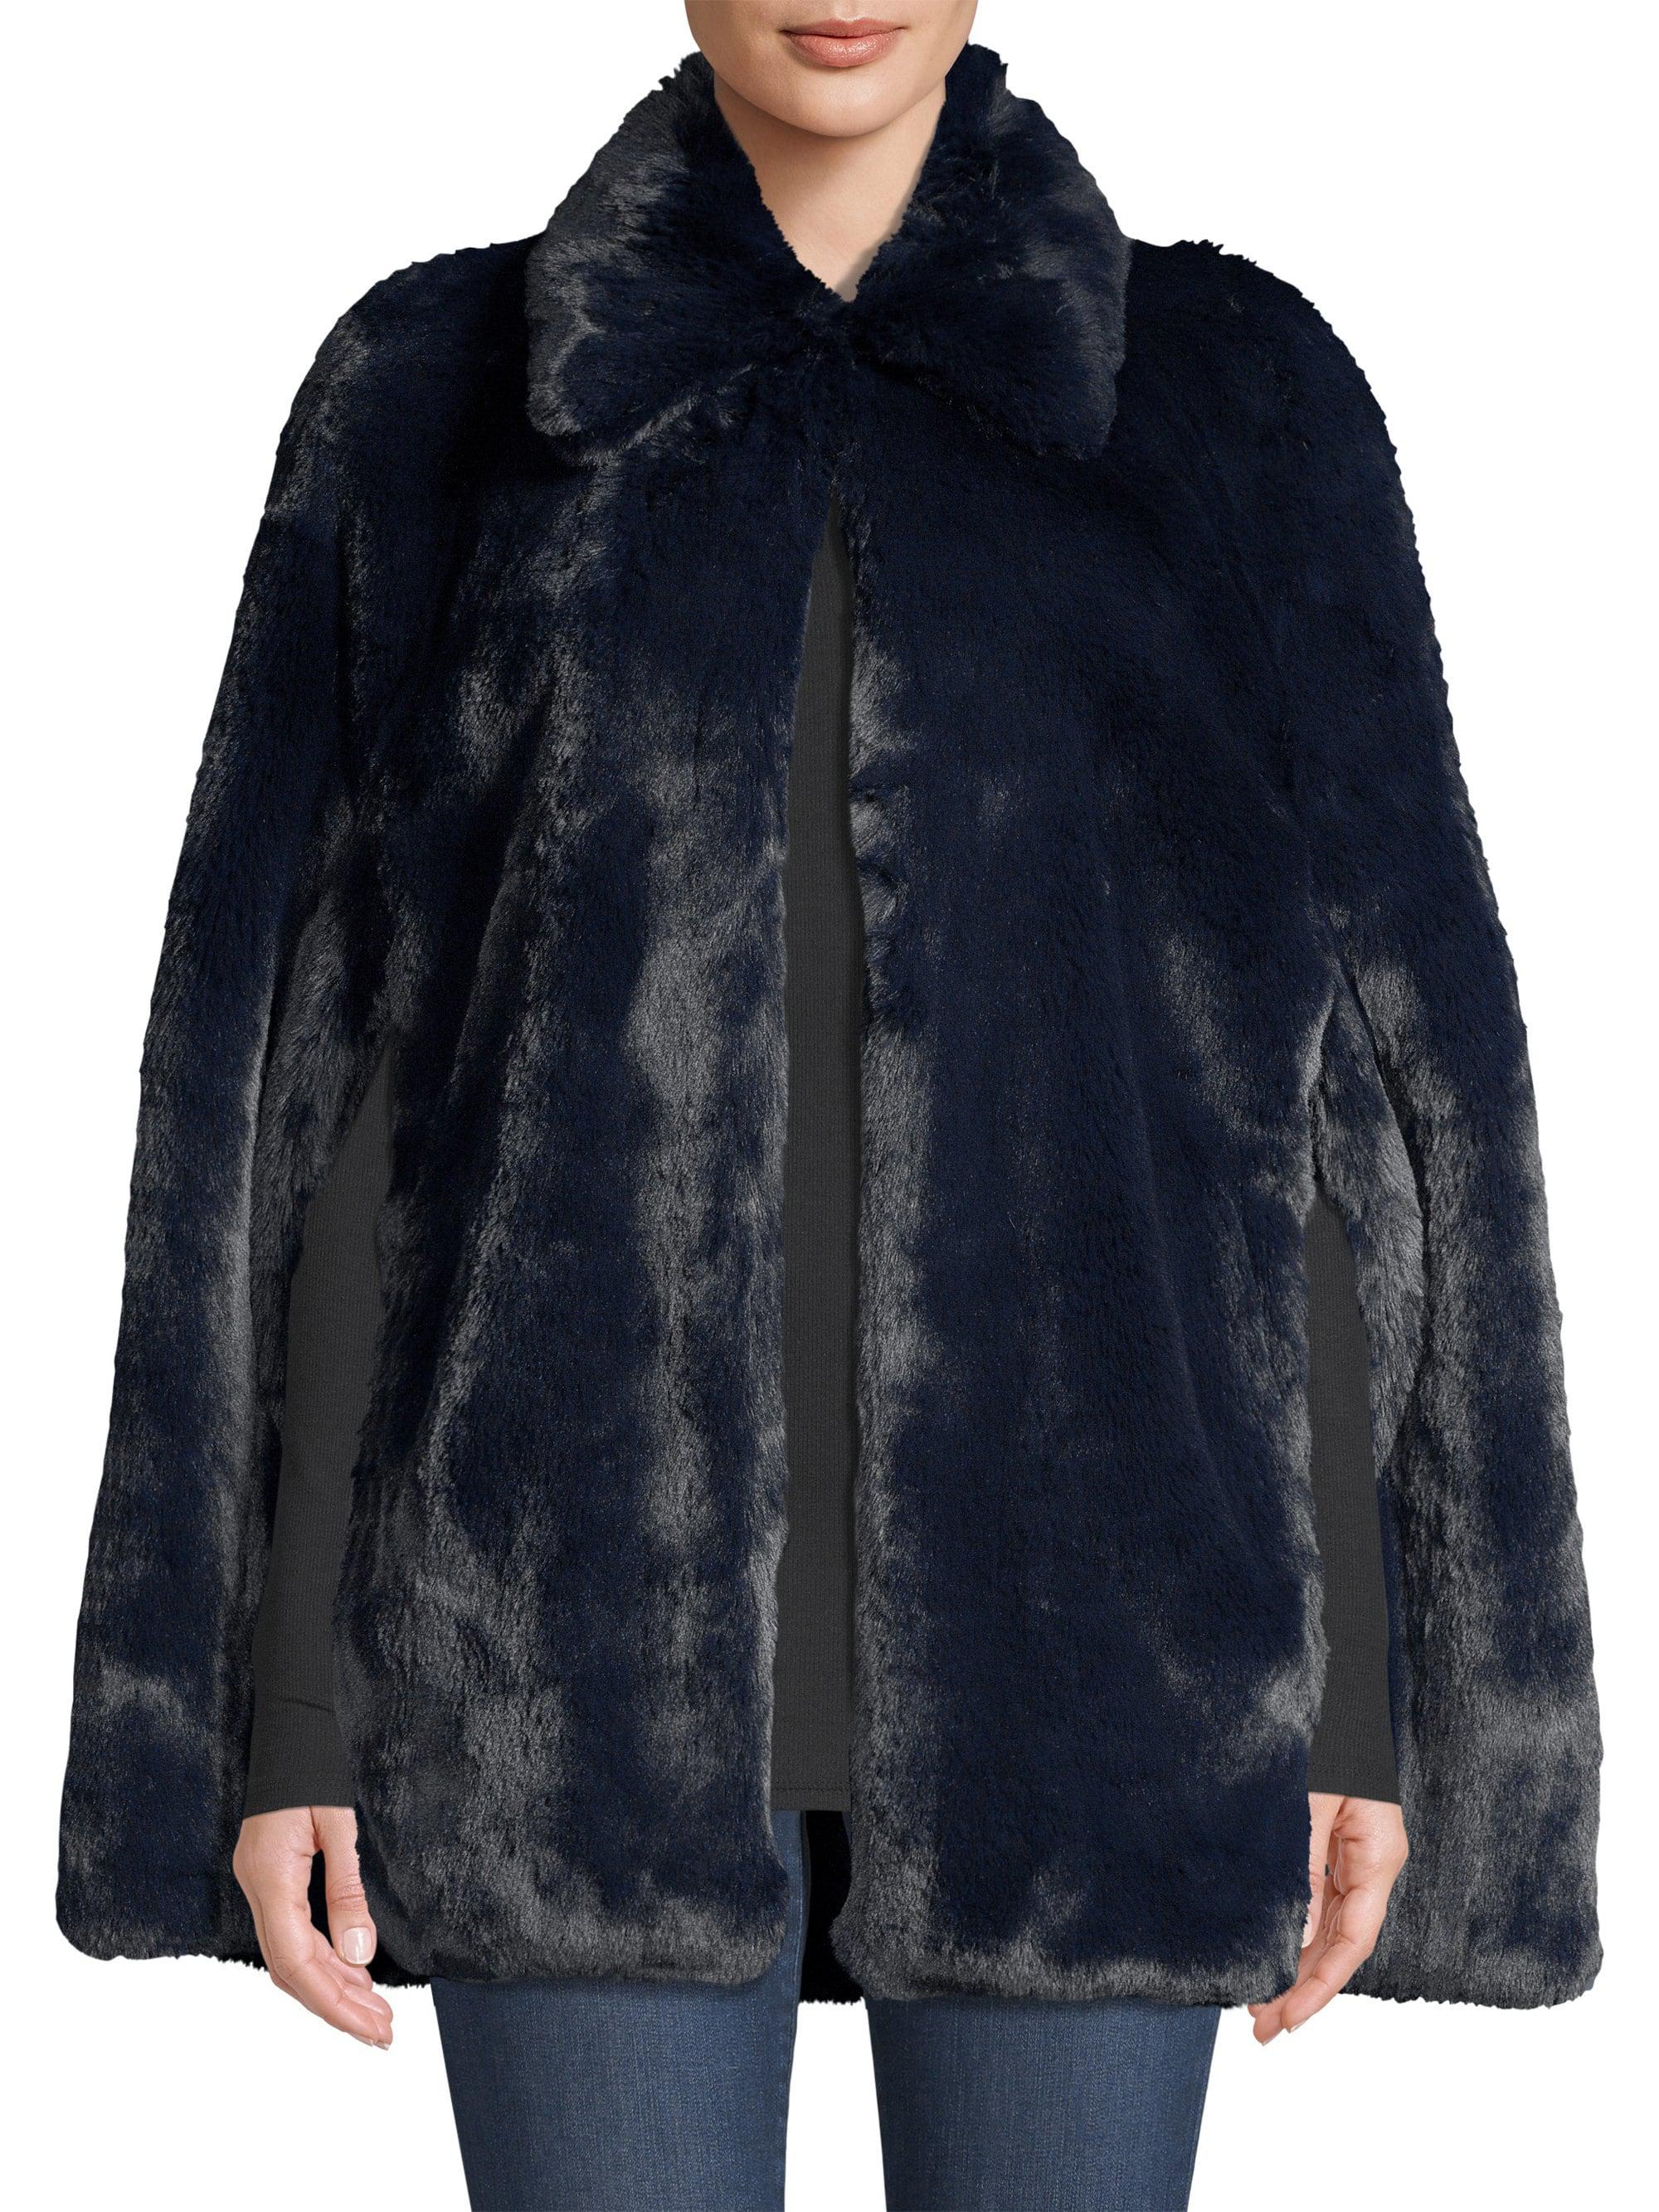 Burberry Allford Faux Fur Cape in Navy 